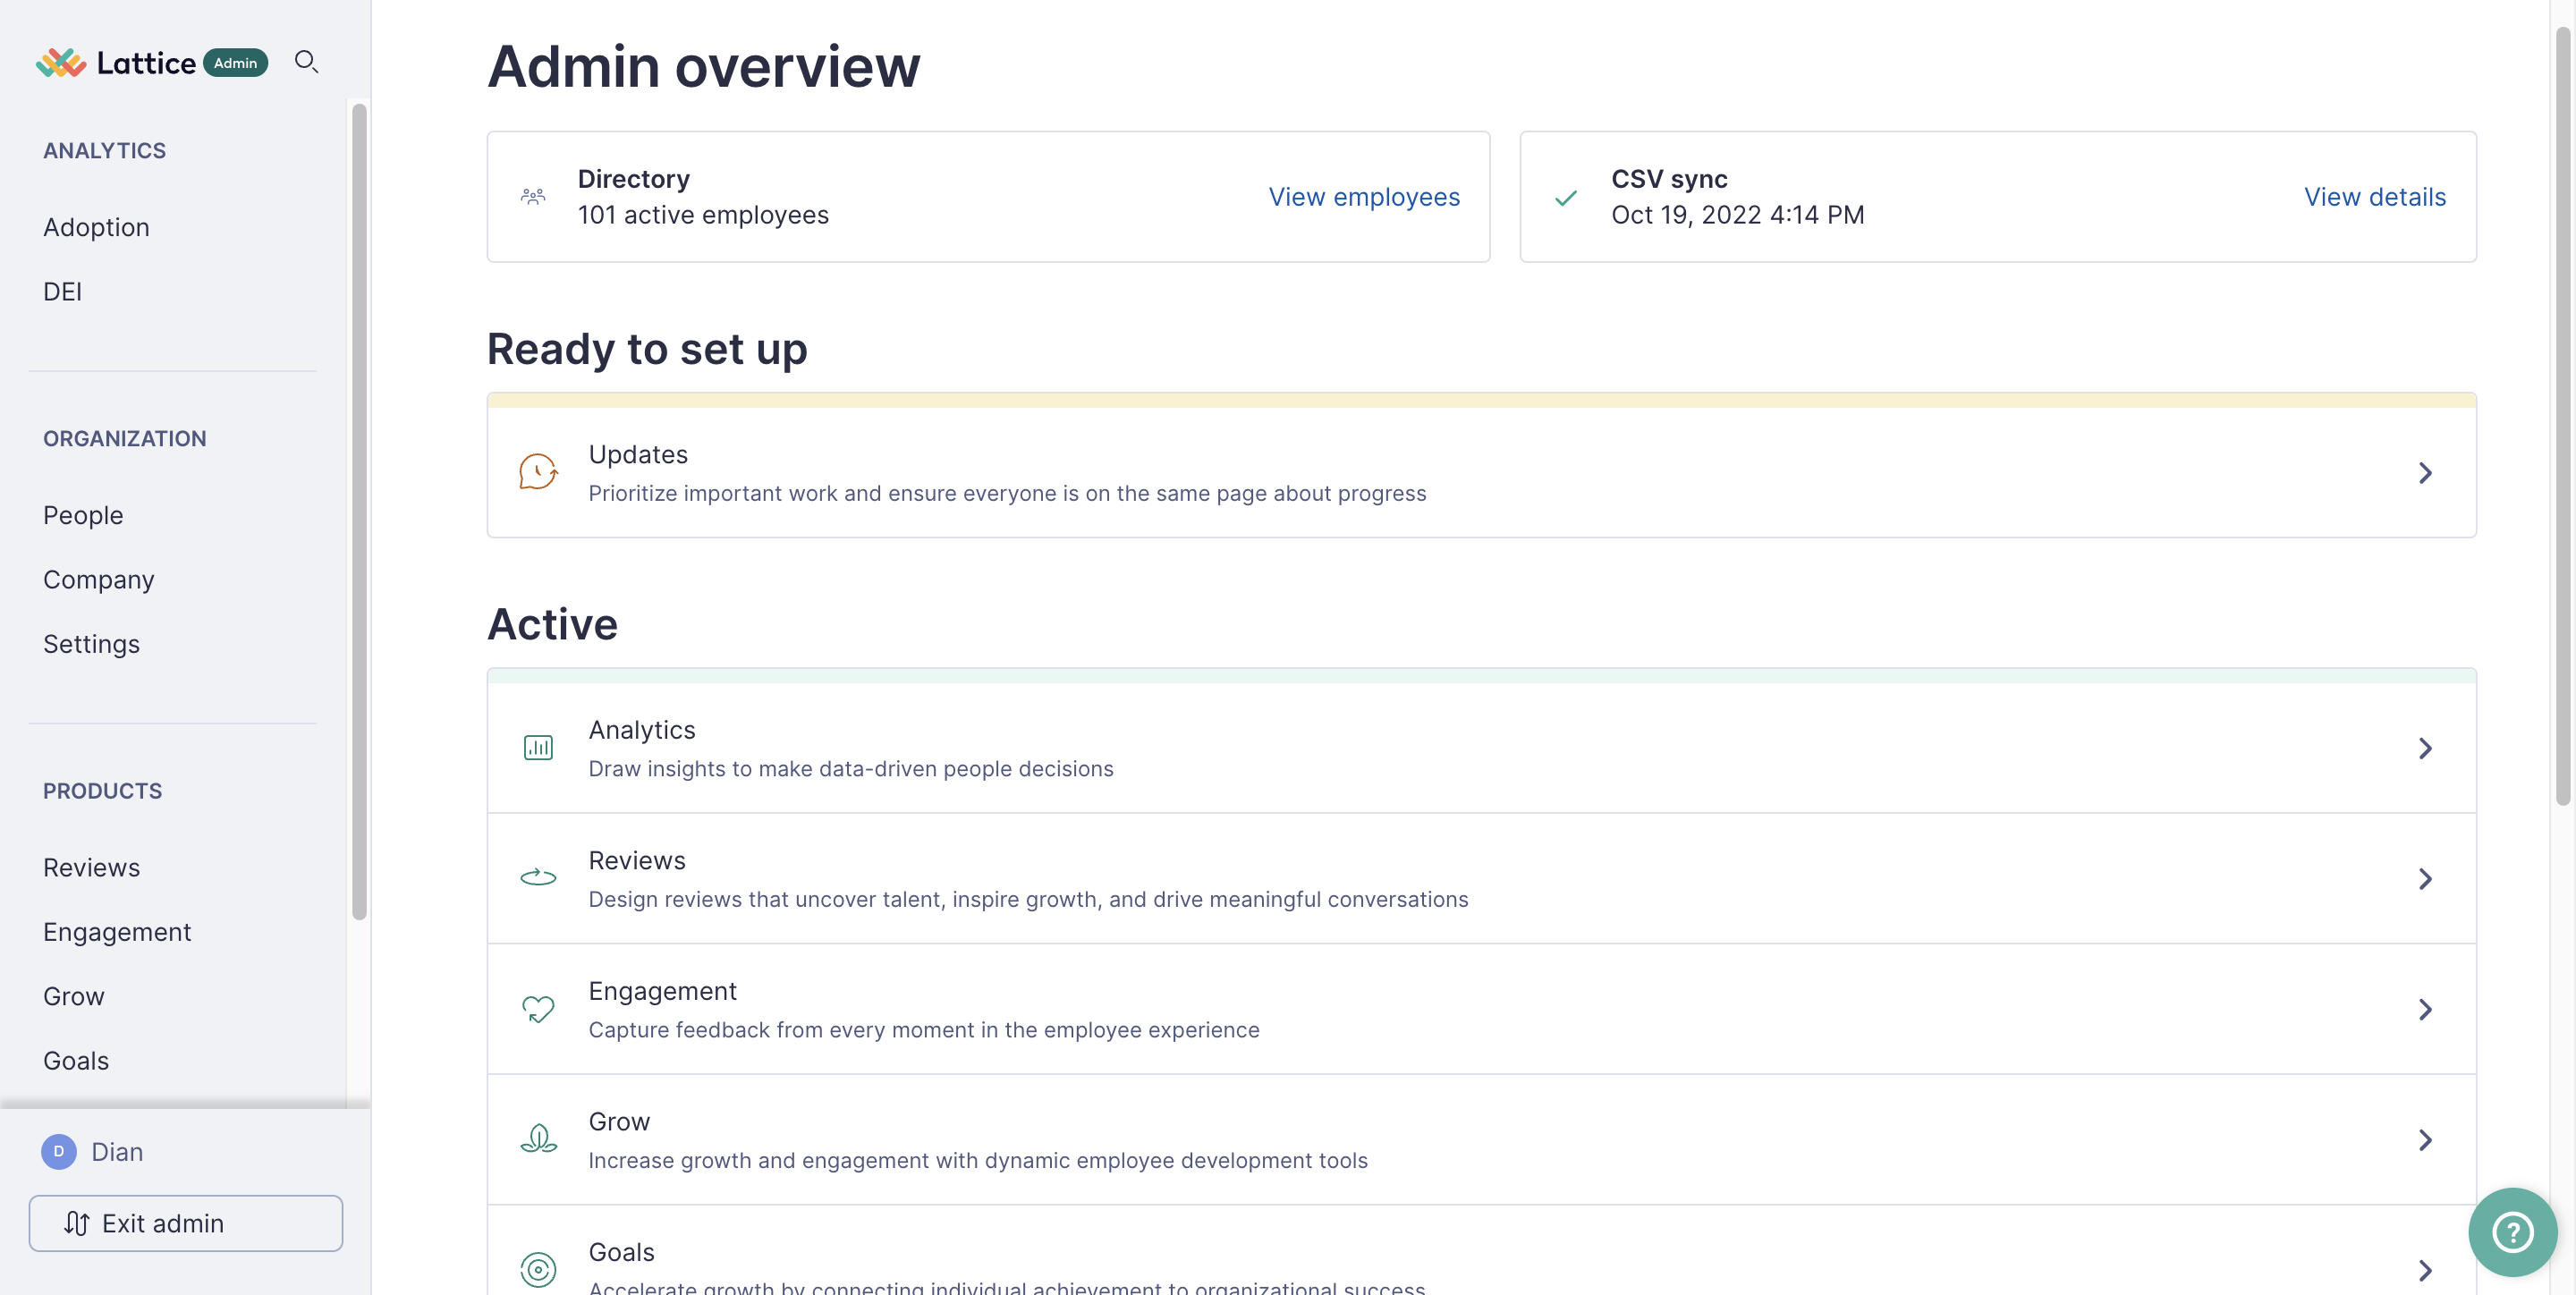 Lattice's Admin Overview page. The Page consists of two main sections: Ready to set up and Active.